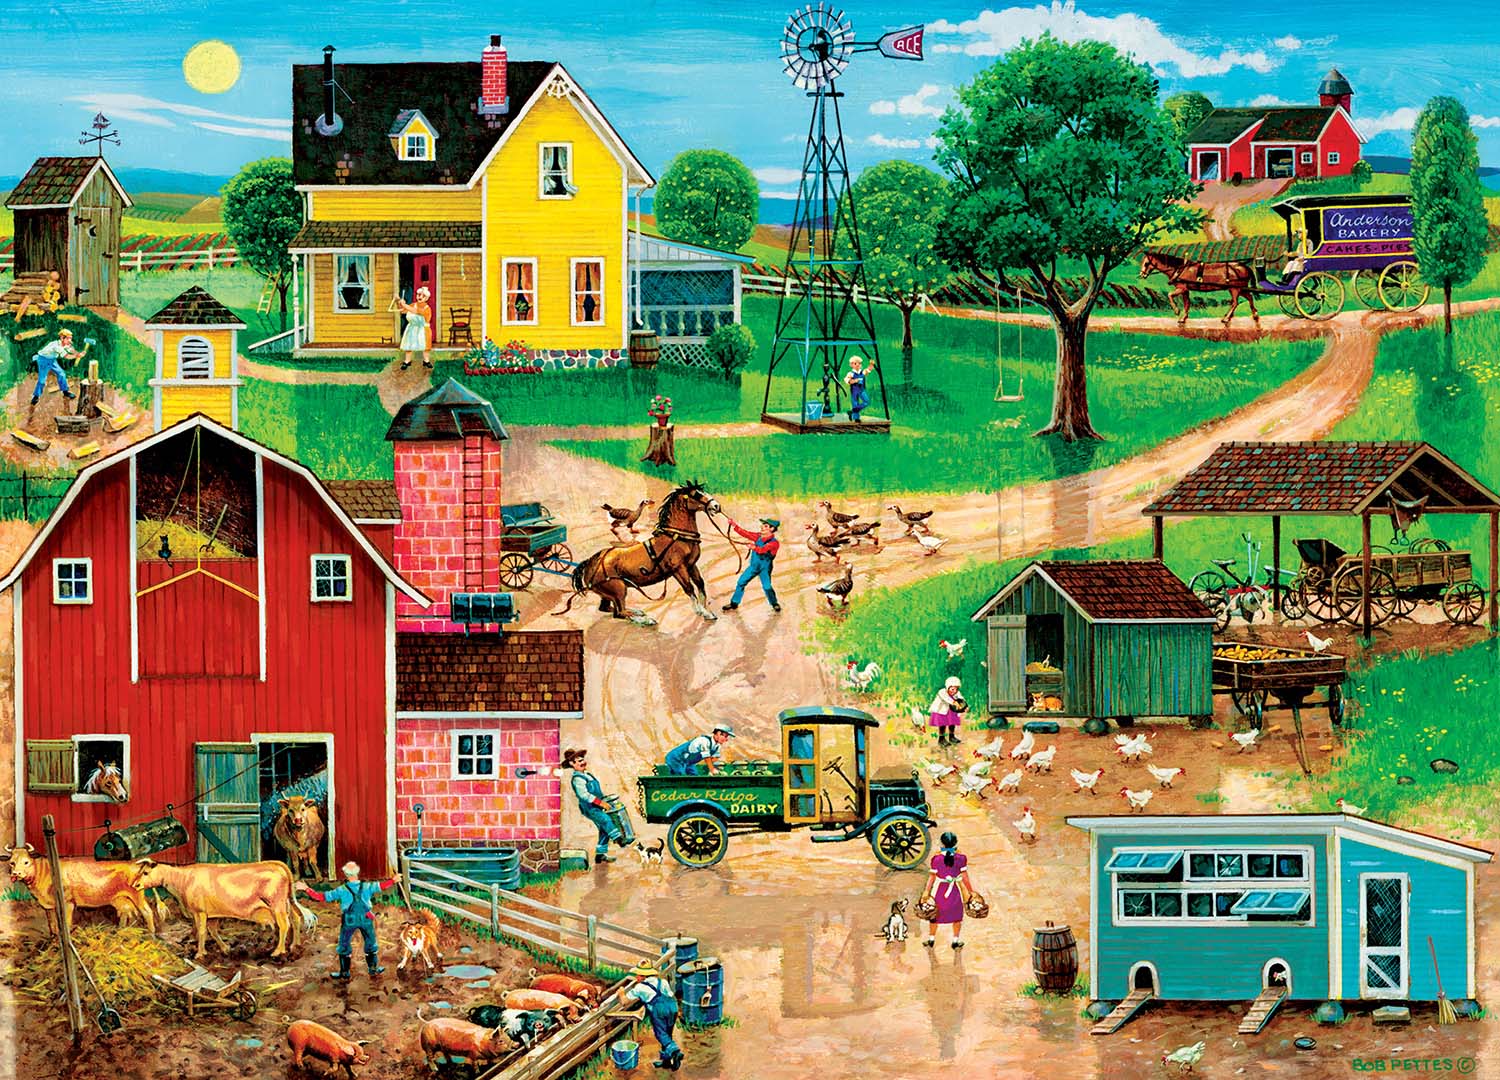 After the Chores Americana Jigsaw Puzzle